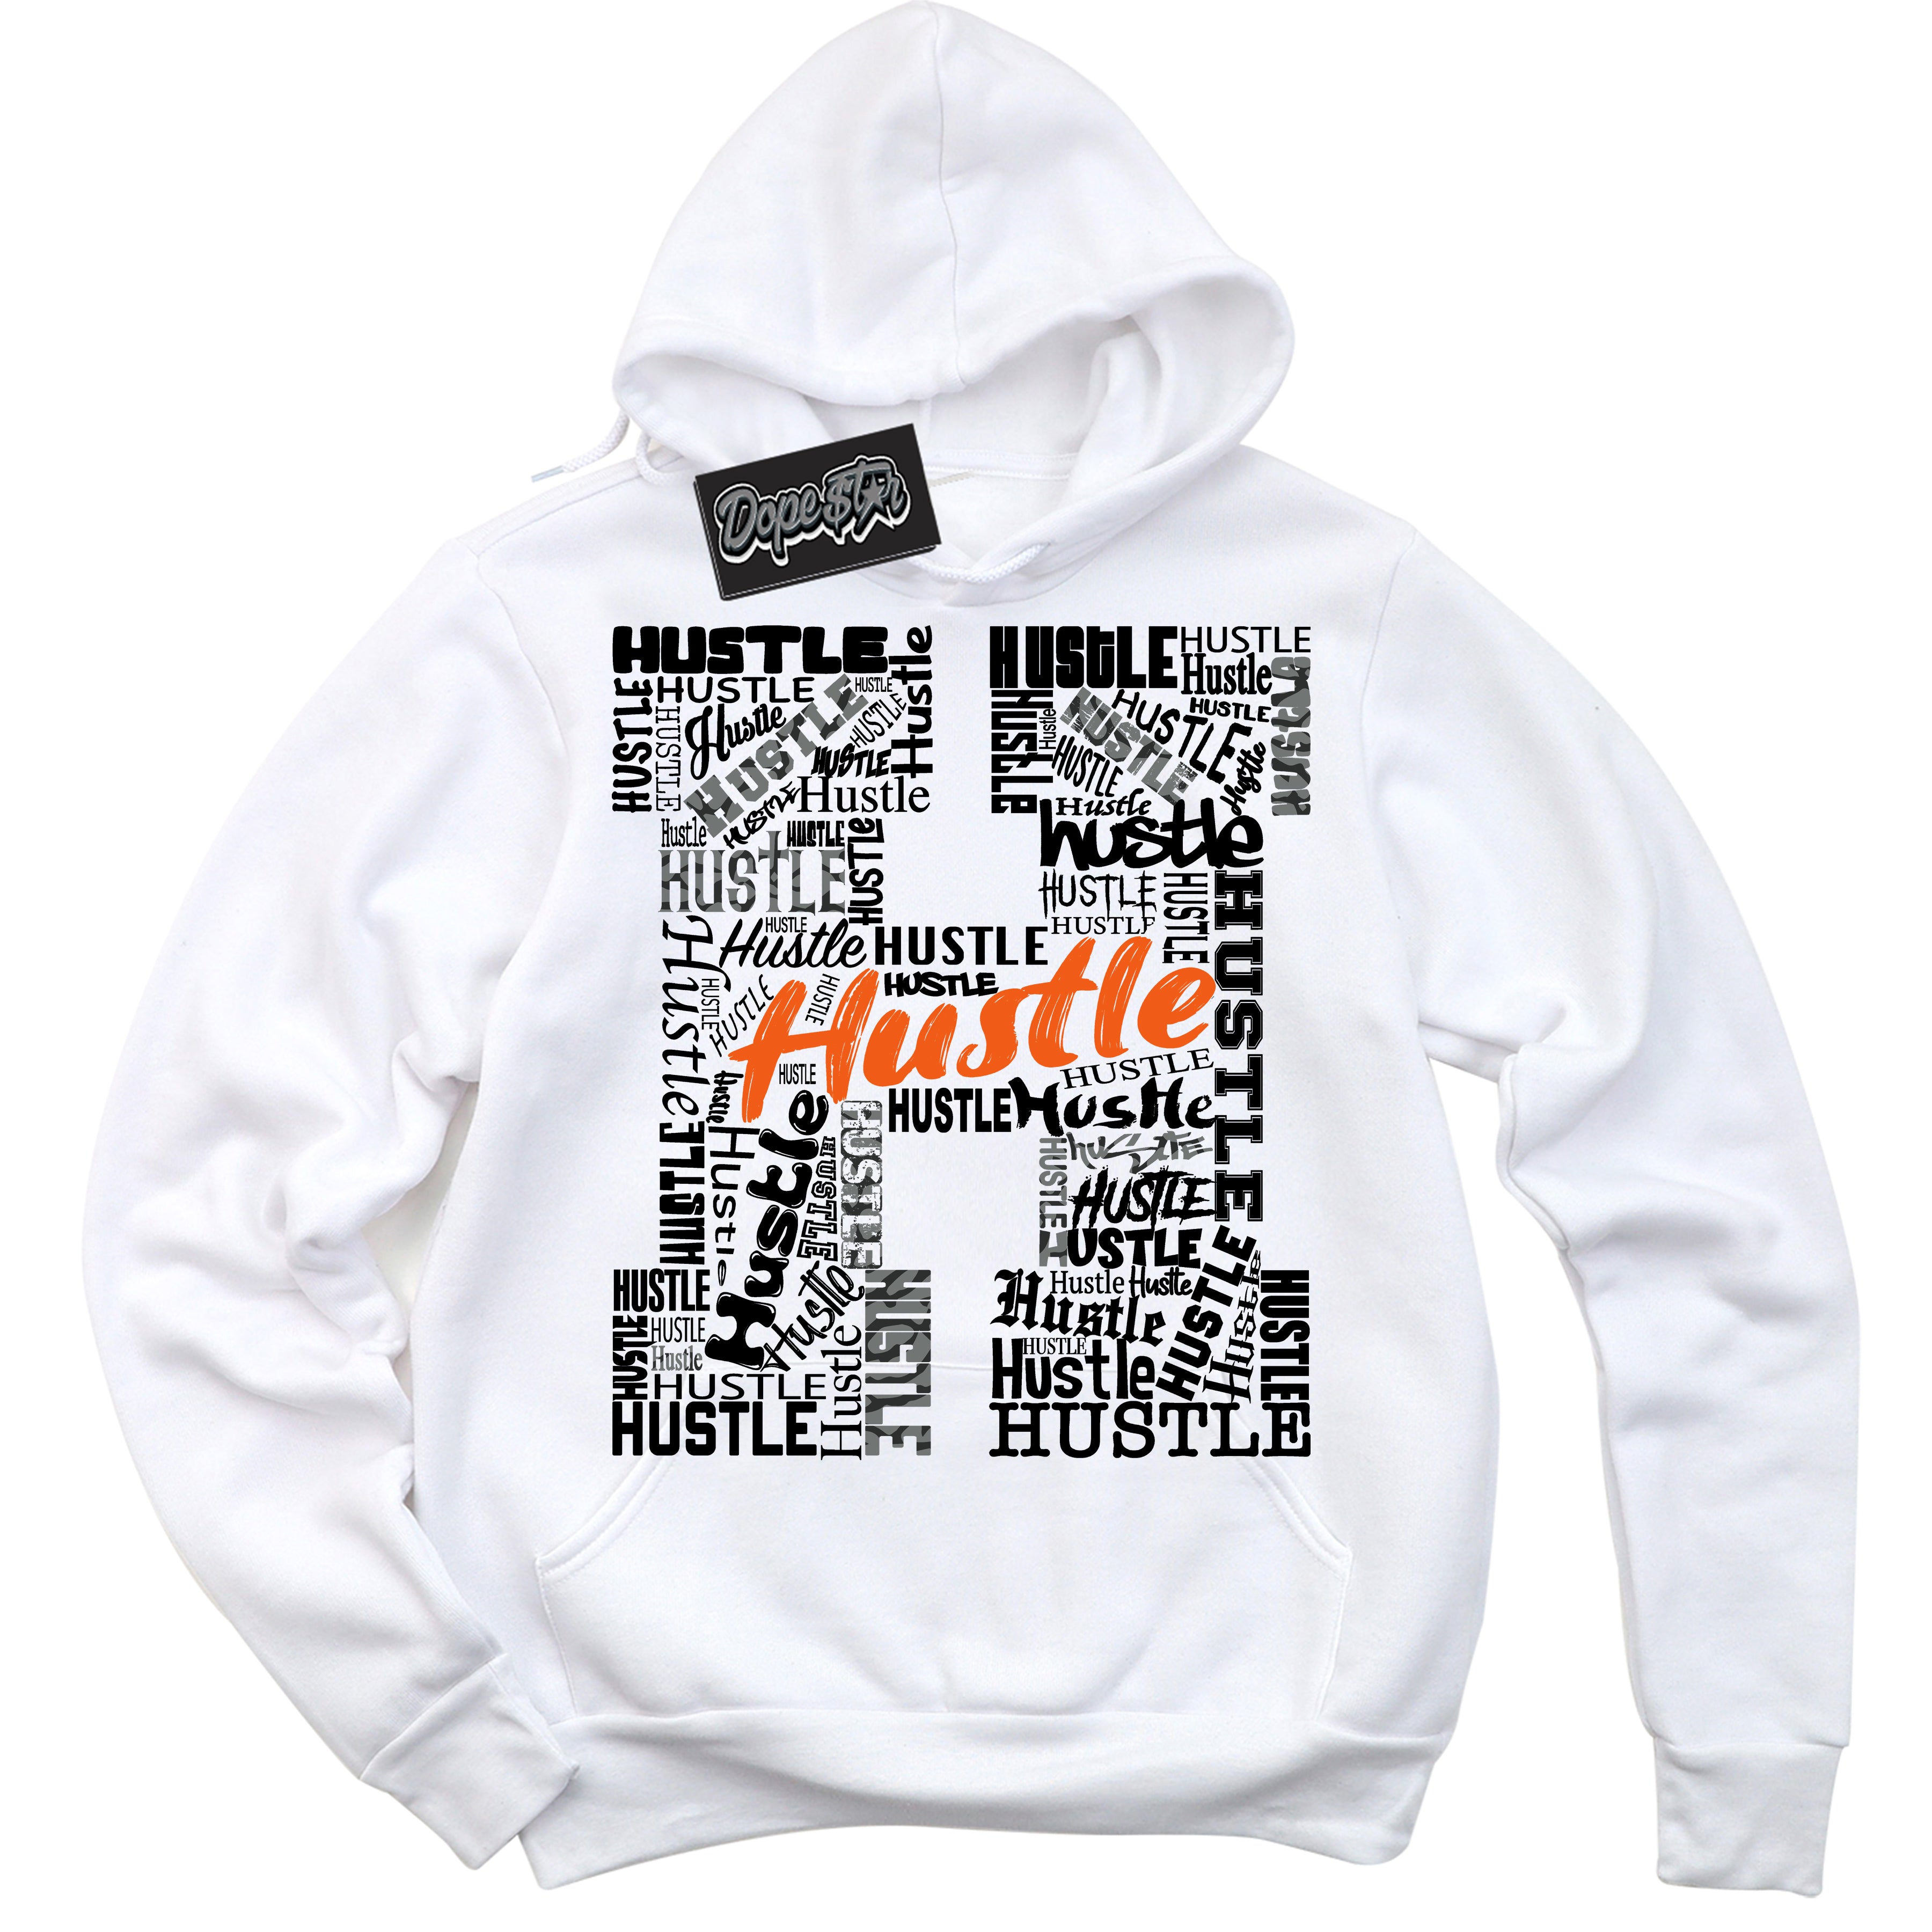 Cool White Graphic DopeStar Hoodie with “  Hustle H “ print, that perfectly matches Fear Pack 3s sneakers